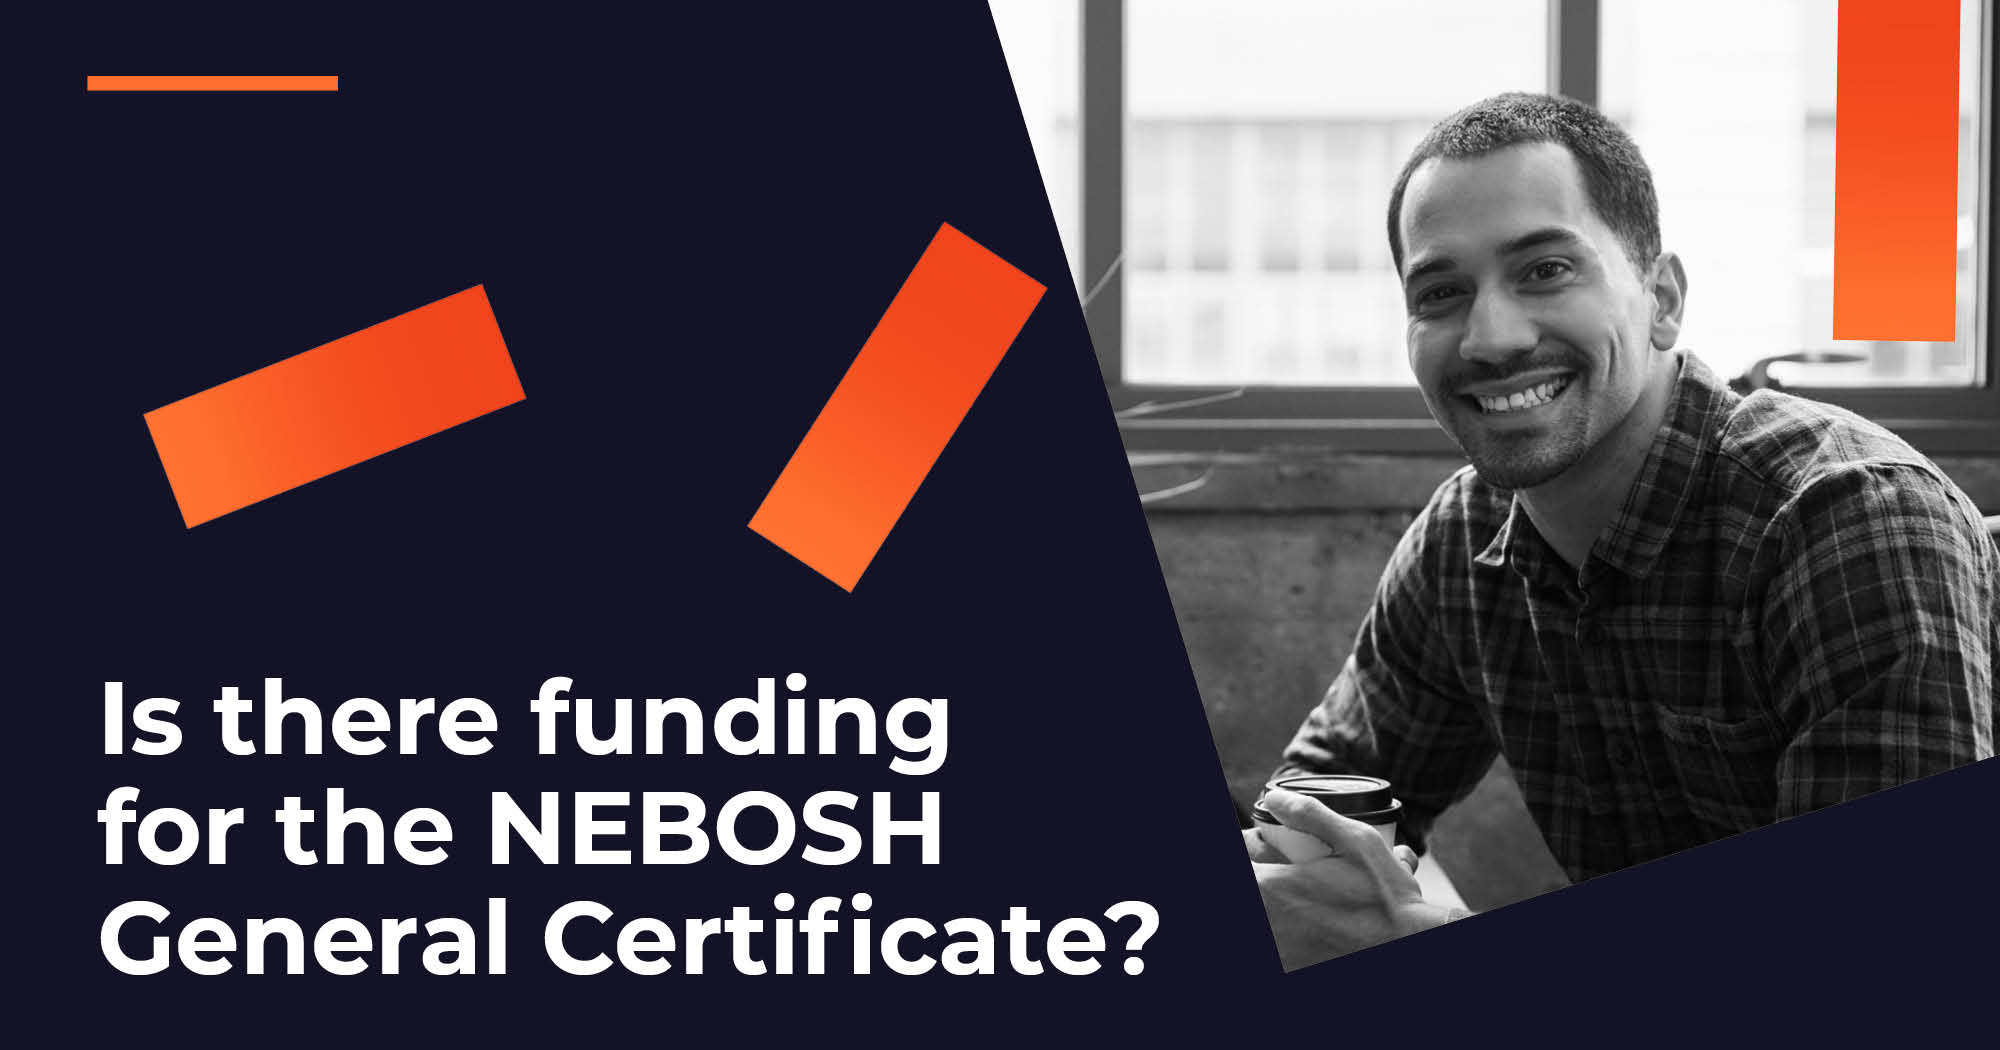 Is There Funding For The NEBOSH General Certificate? Image